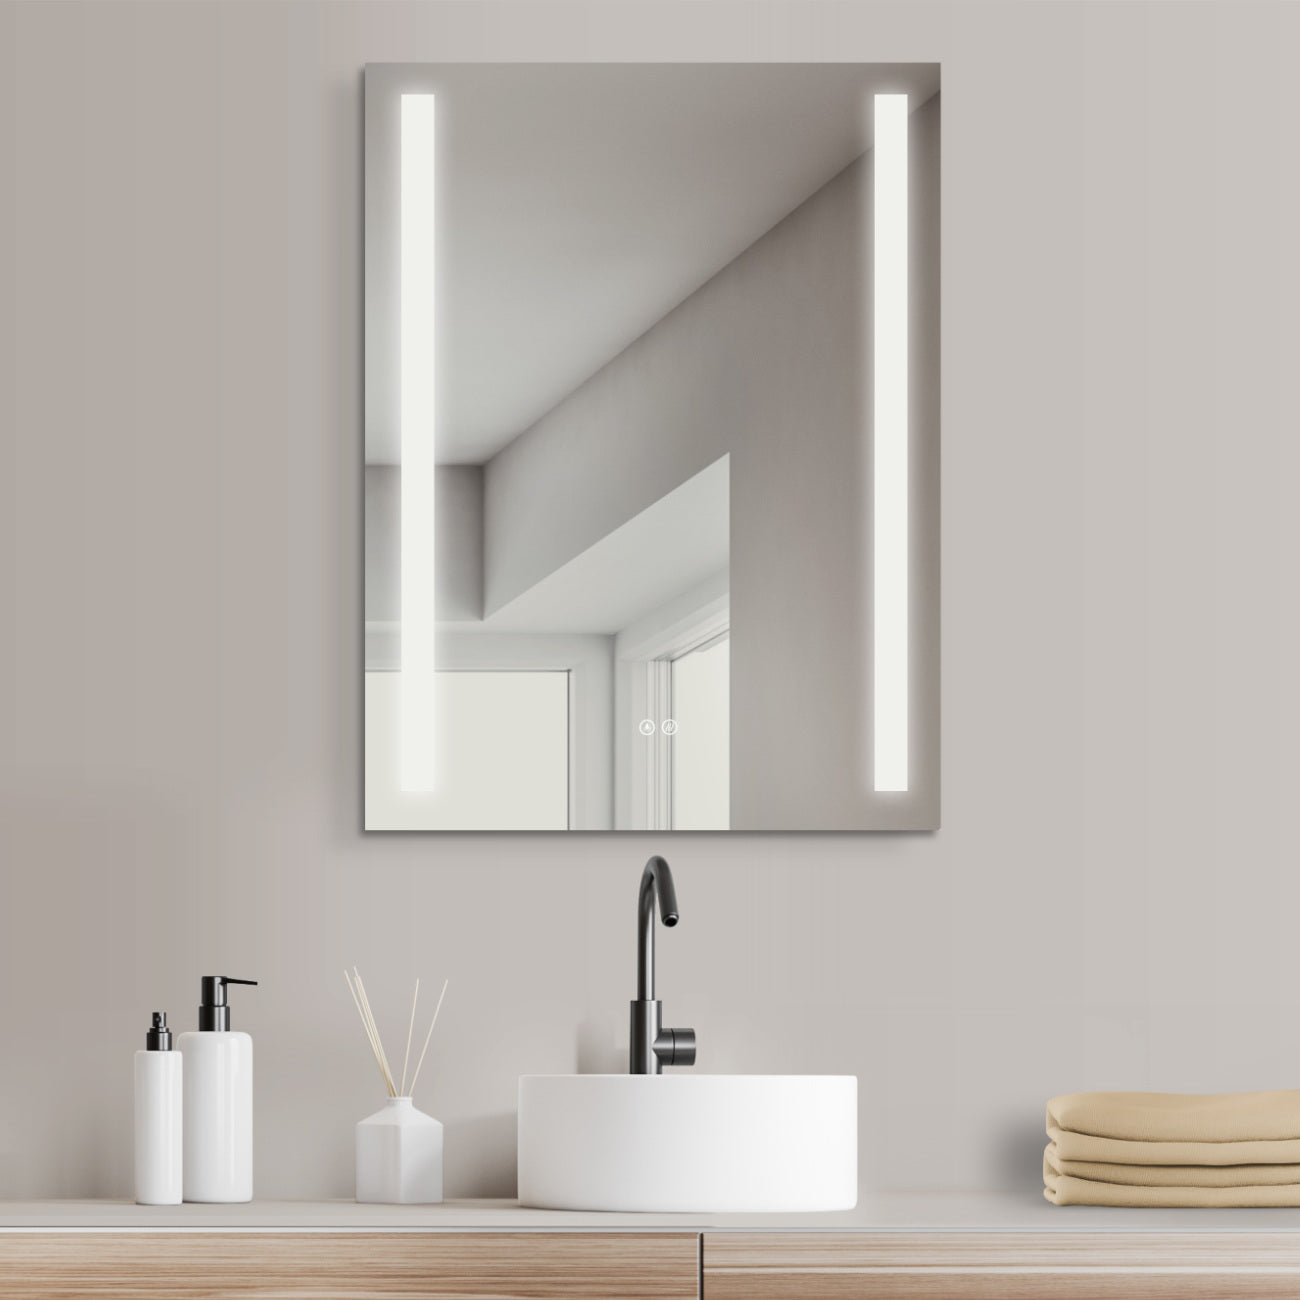 ANTI-FOG LED bathroom mirror with mirror heating, light change from warm white to cold white, illuminated from the side.